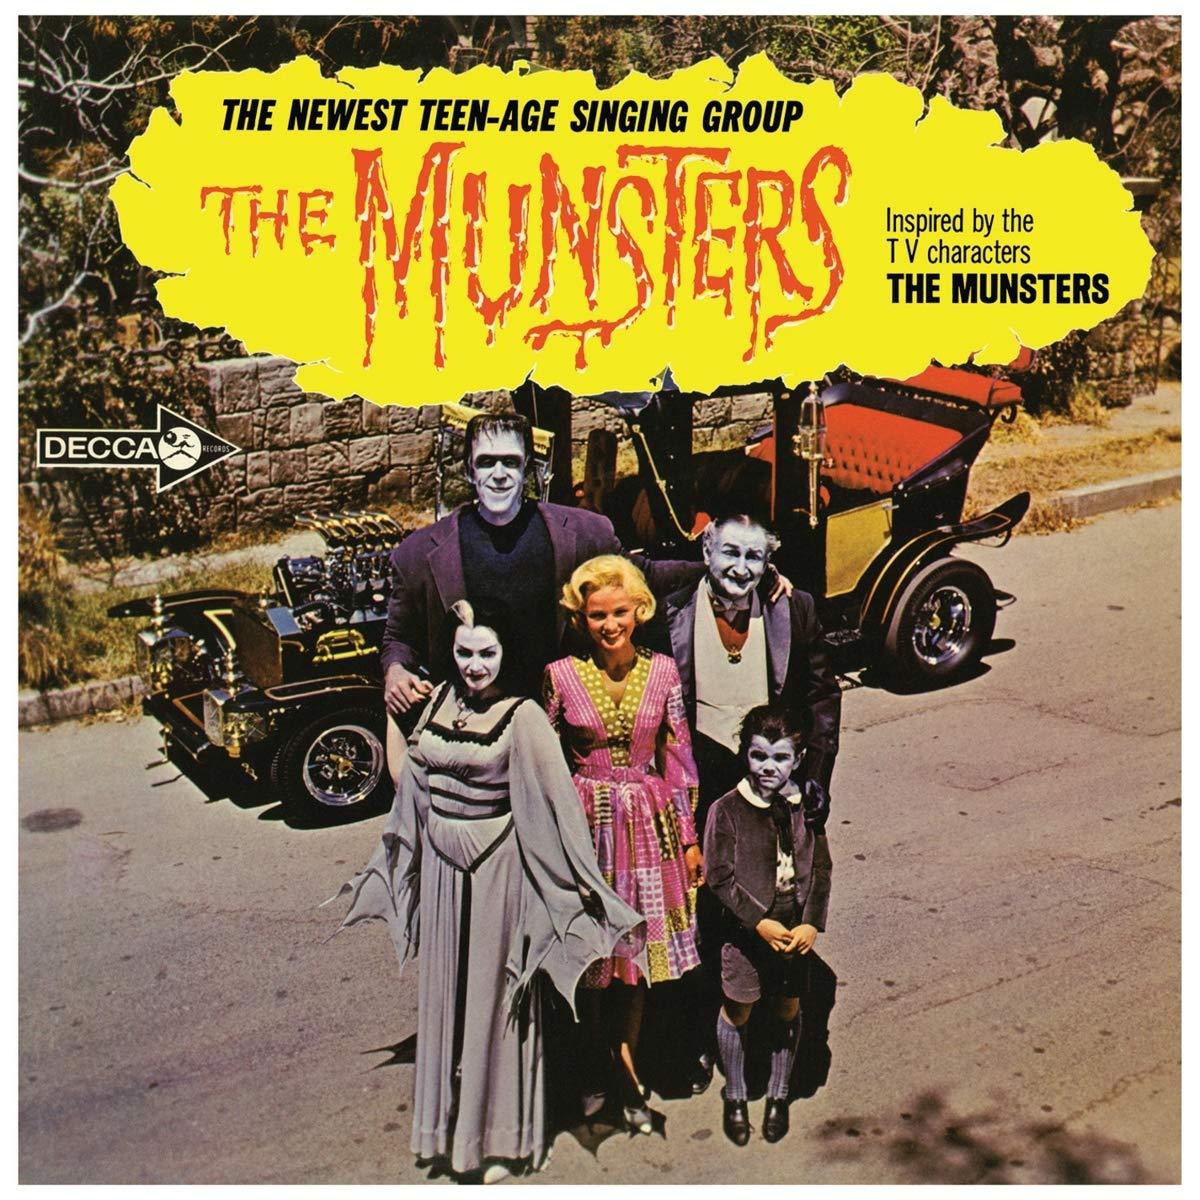 Primary image for The Munsters (Limited Orange with Black Splatter Vinyl Edition)